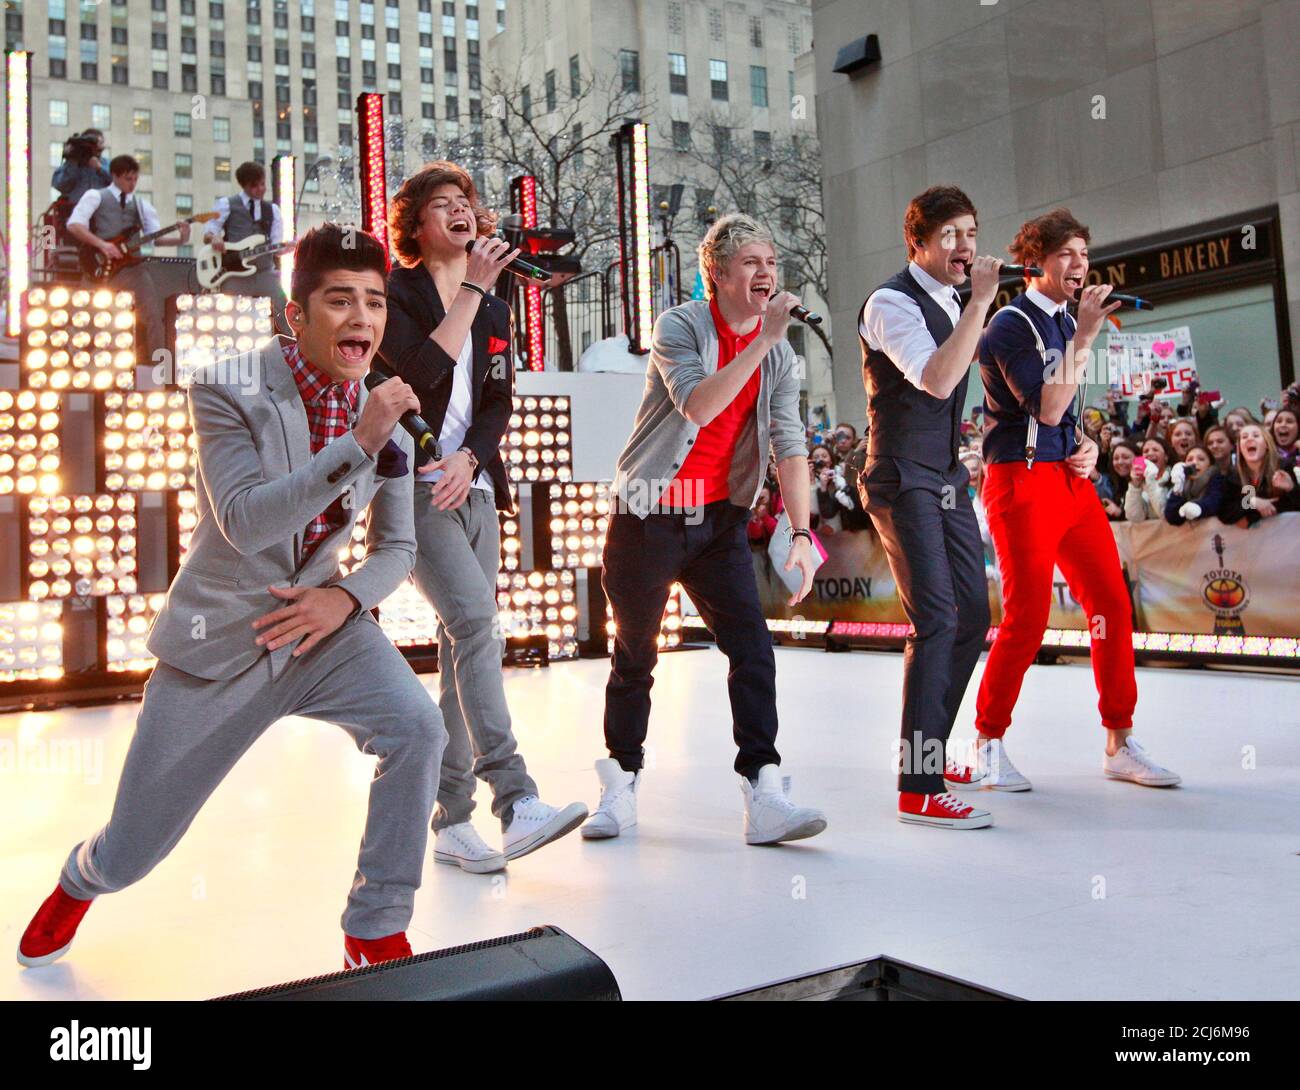 British-Irish band One Direction performs on NBC's 'Today' show in New York March 12, 2012. REUTERS/Brendan McDermid (UNITED STATES - Tags: ENTERTAINMENT) Stock Photo